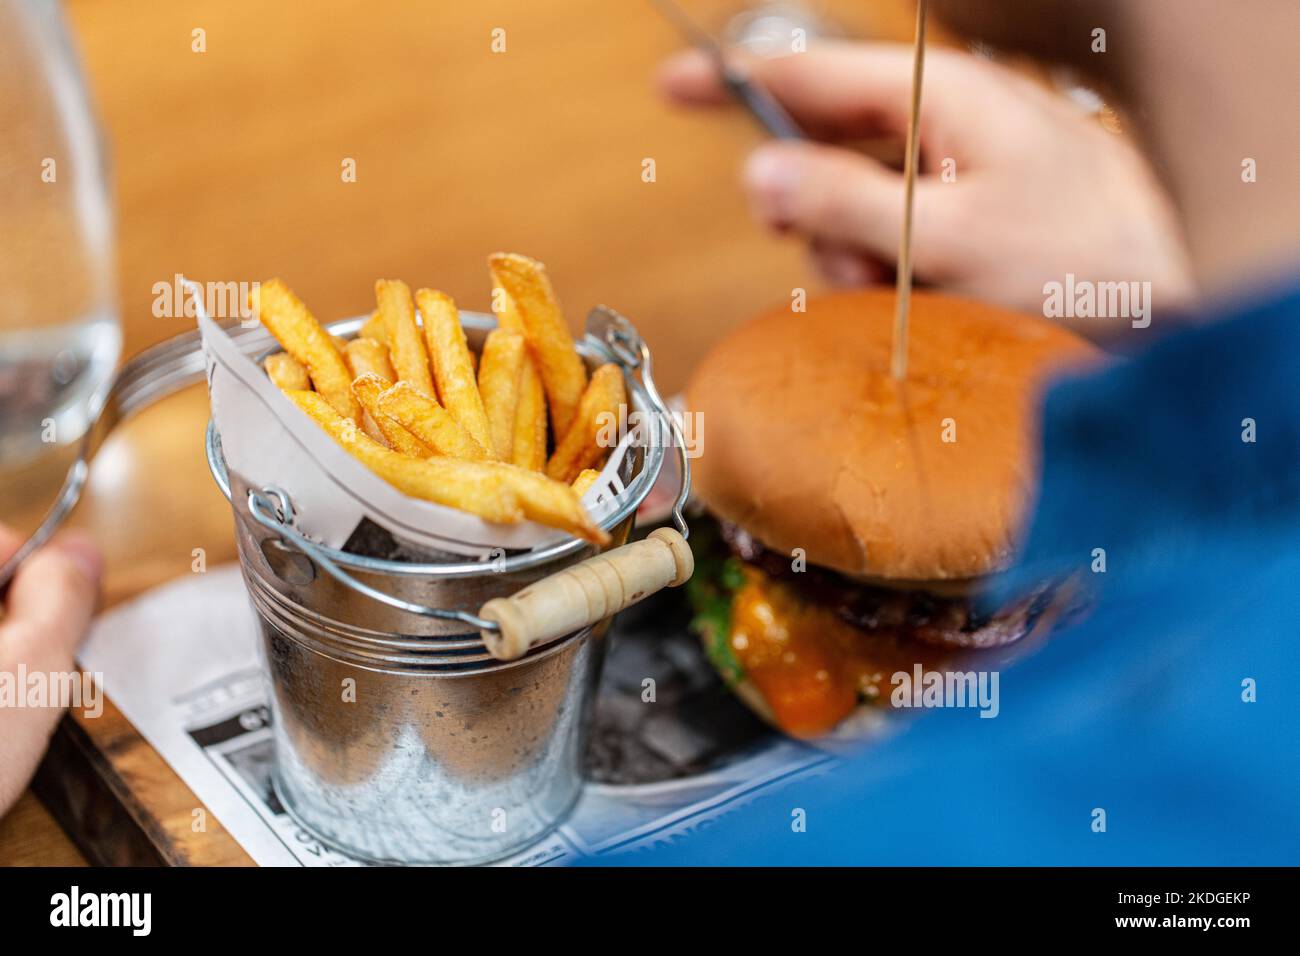 close up of man eating burger and french fries Stock Photo